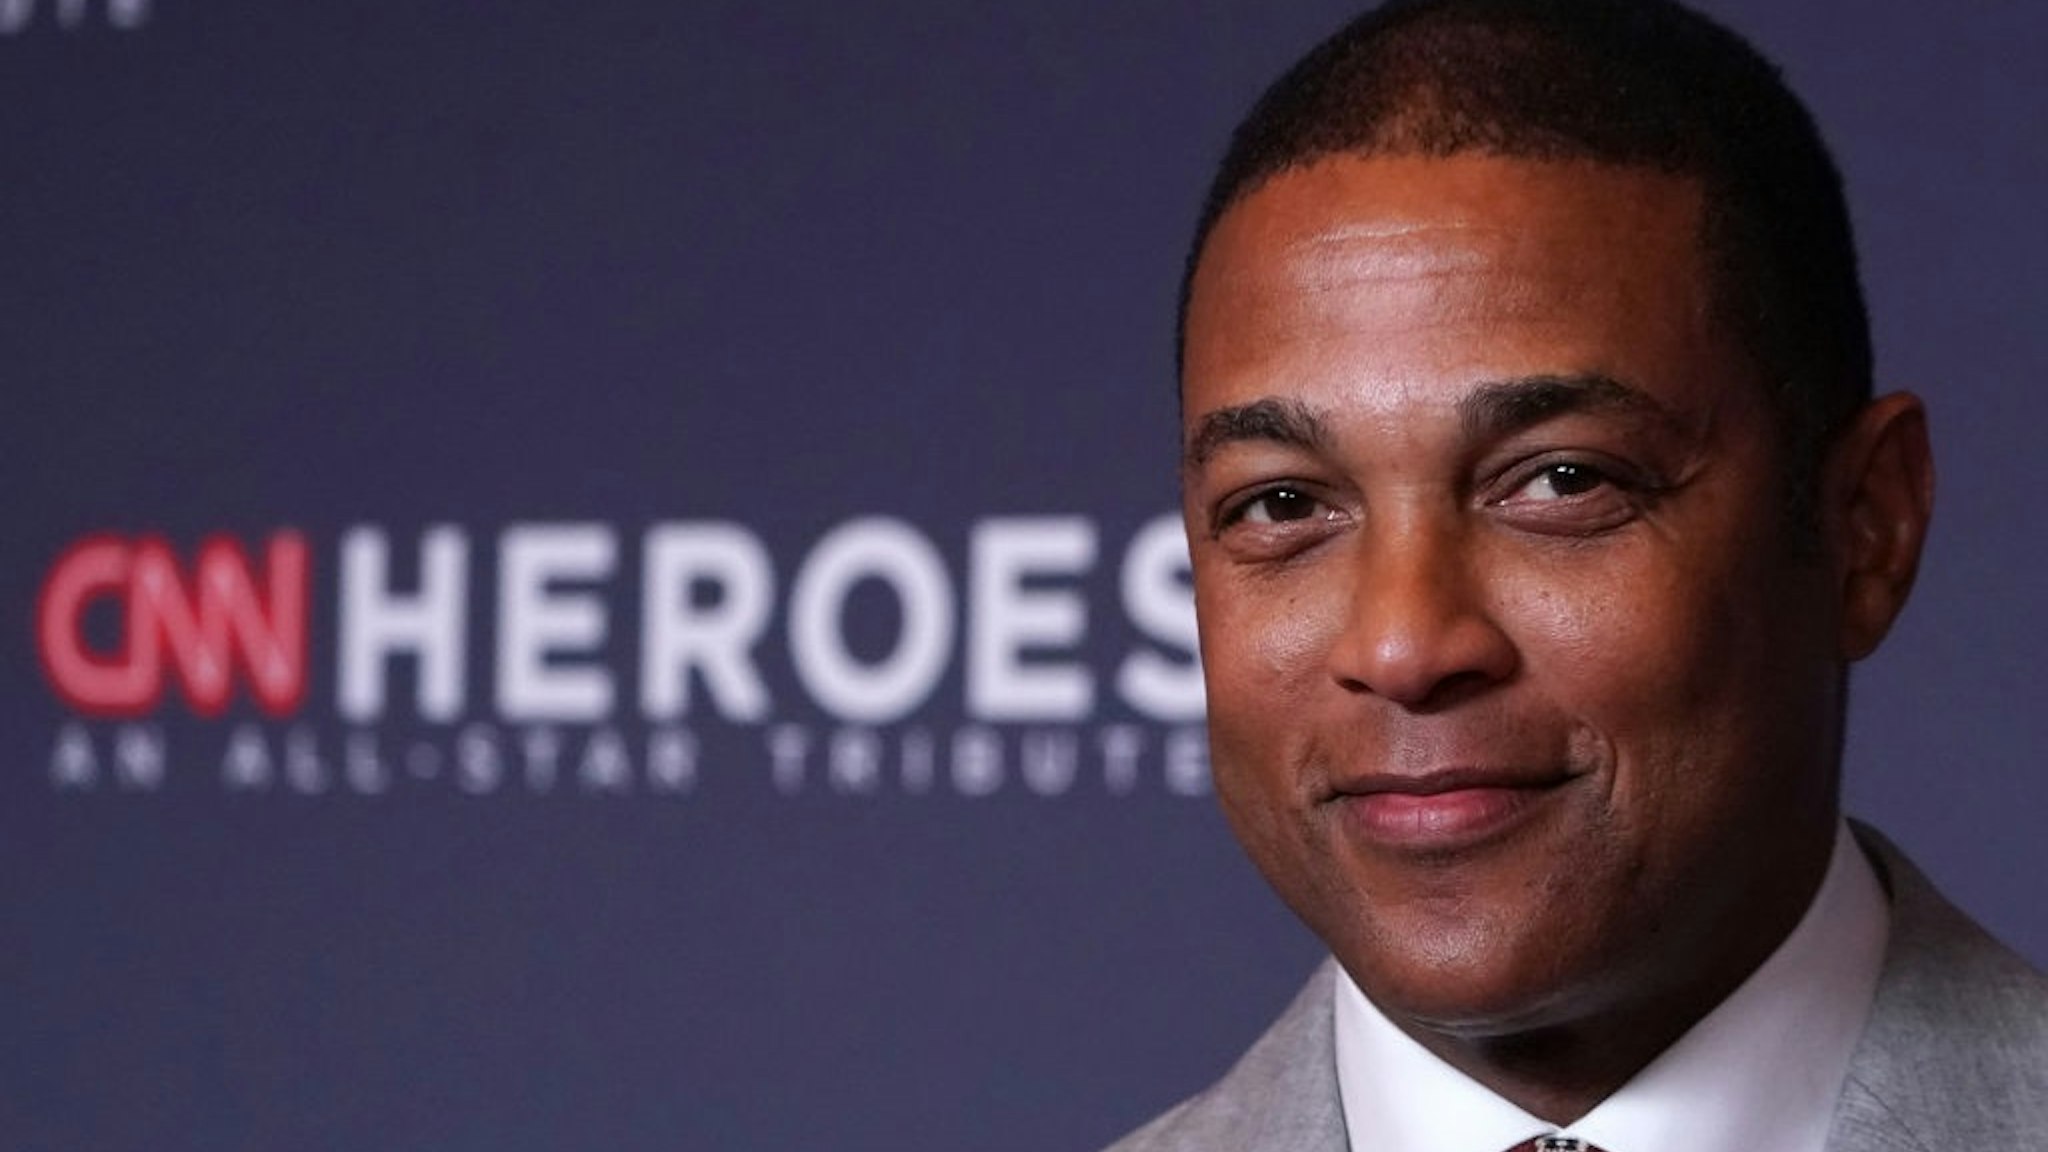 NEW YORK, NEW YORK - DECEMBER 08: Don Lemon attends the 13th Annual CNN Heroes at the American Museum of Natural History on December 08, 2019 in New York City.